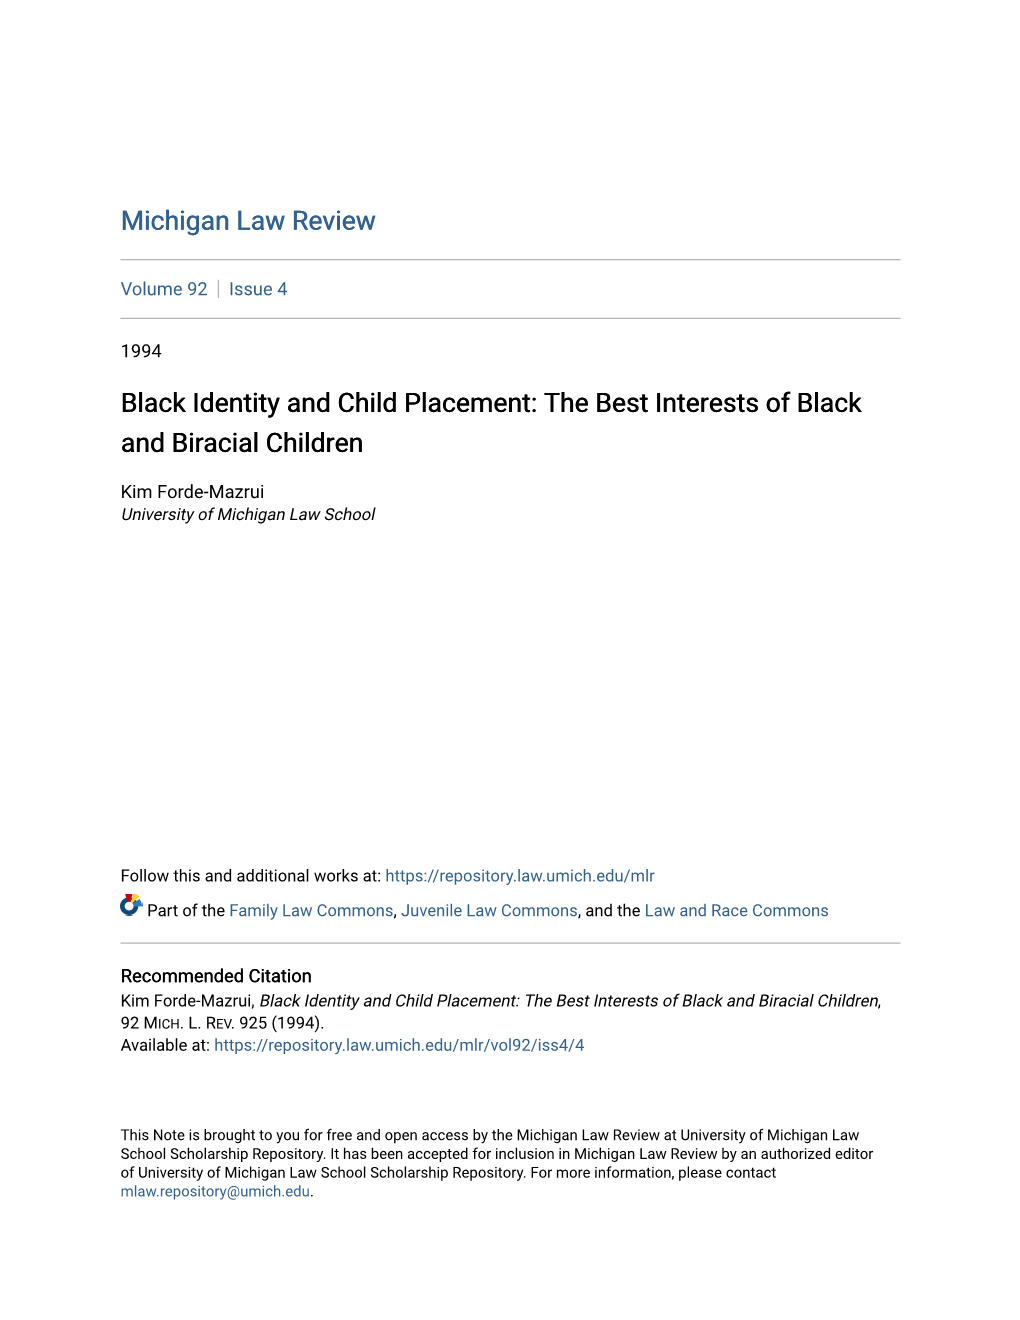 The Best Interests of Black and Biracial Children